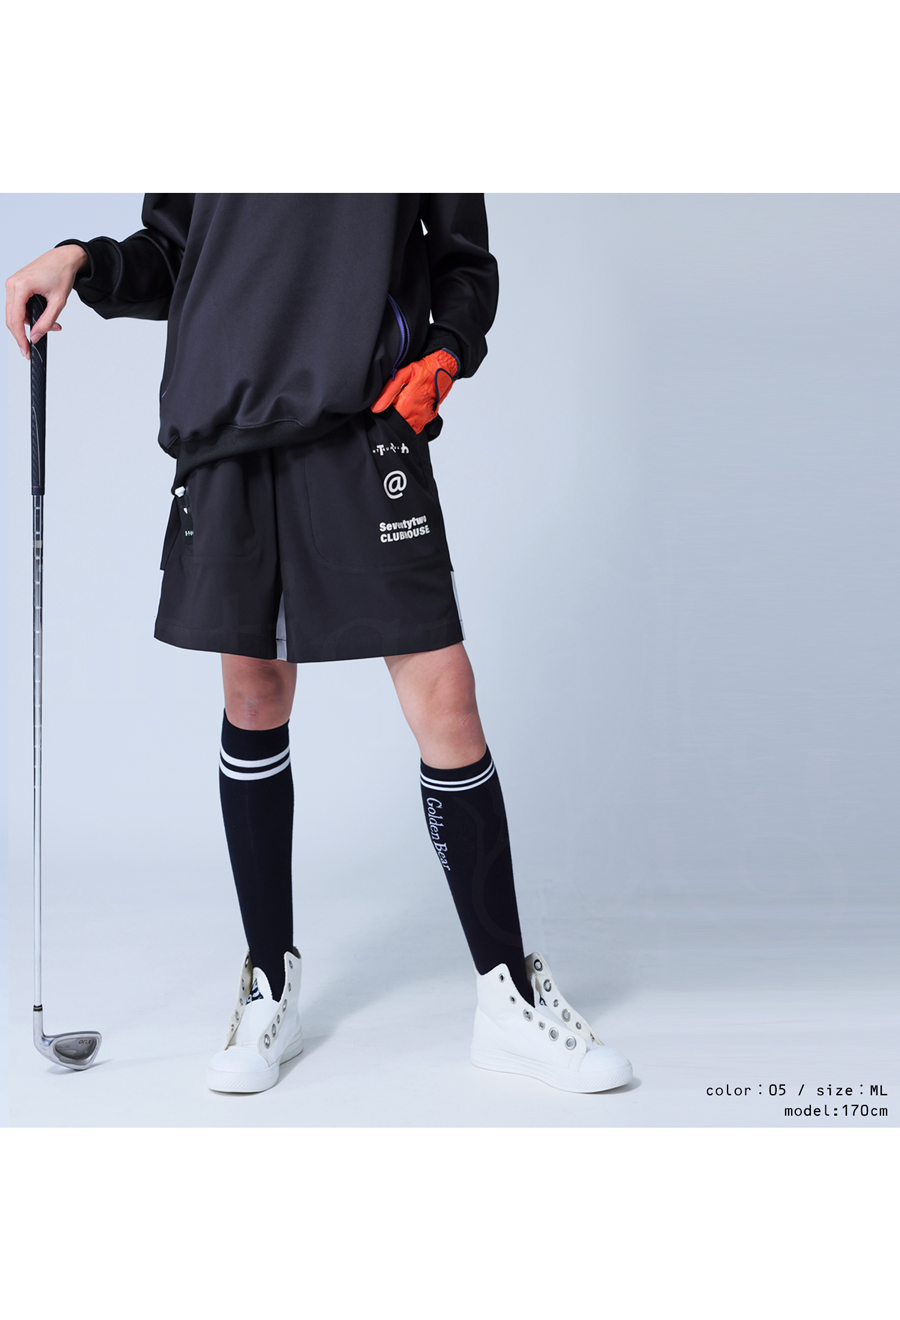 ANTIQUA GOLF×STCH shorts lady's free shipping *4 month 19 day 10 hour ~ sale. black is soon sale expectation!100pt mail service possible Mother's Day 